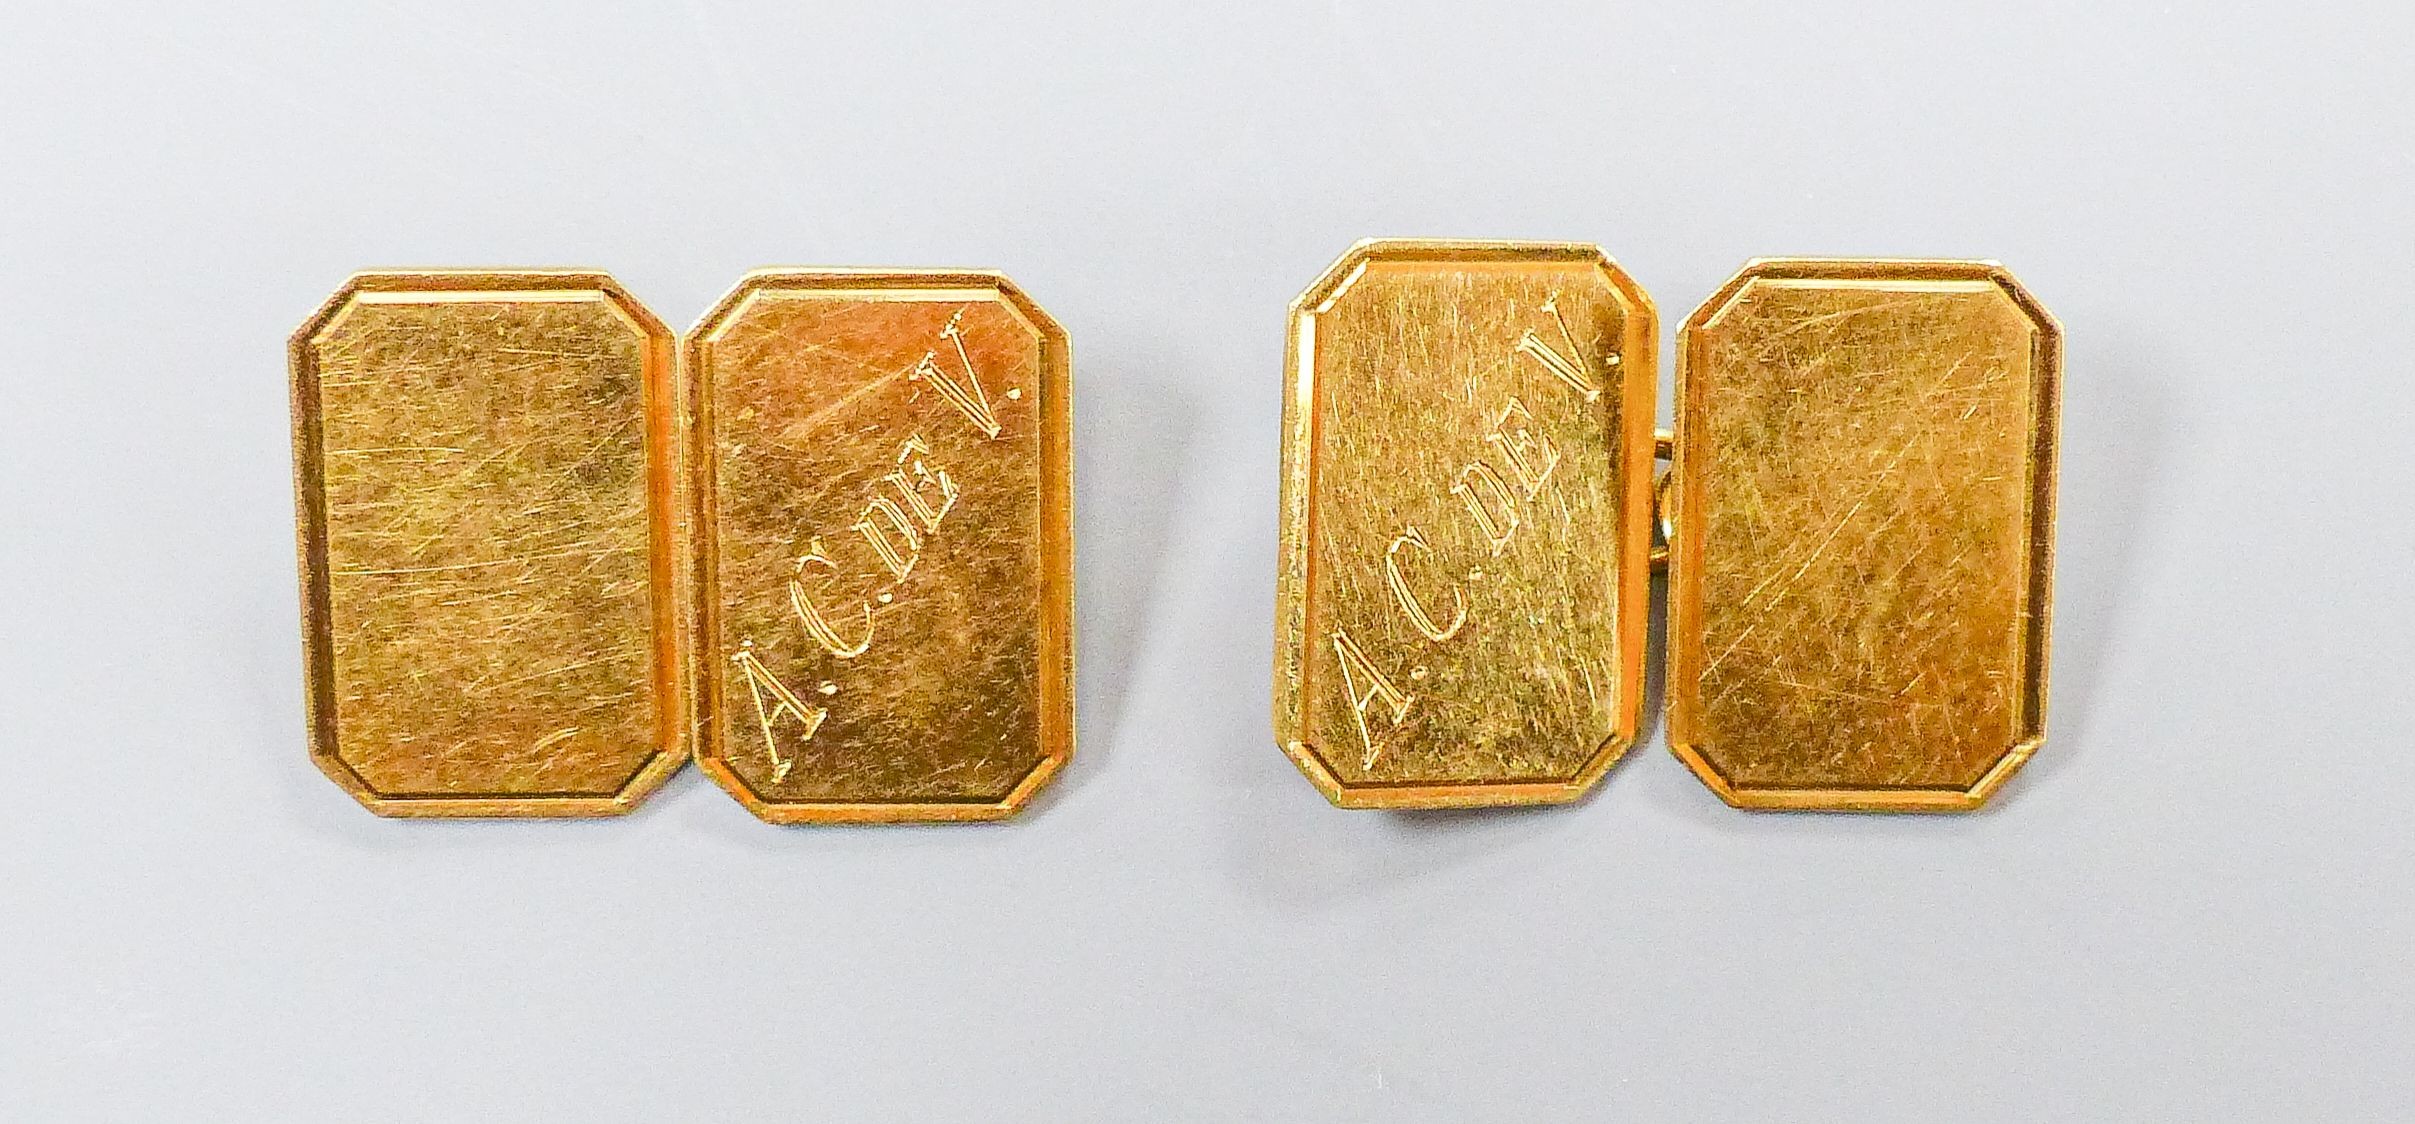 A pair of modern 18ct yellow gold octagonal cufflinks with engraved initials, 8.6 grams.